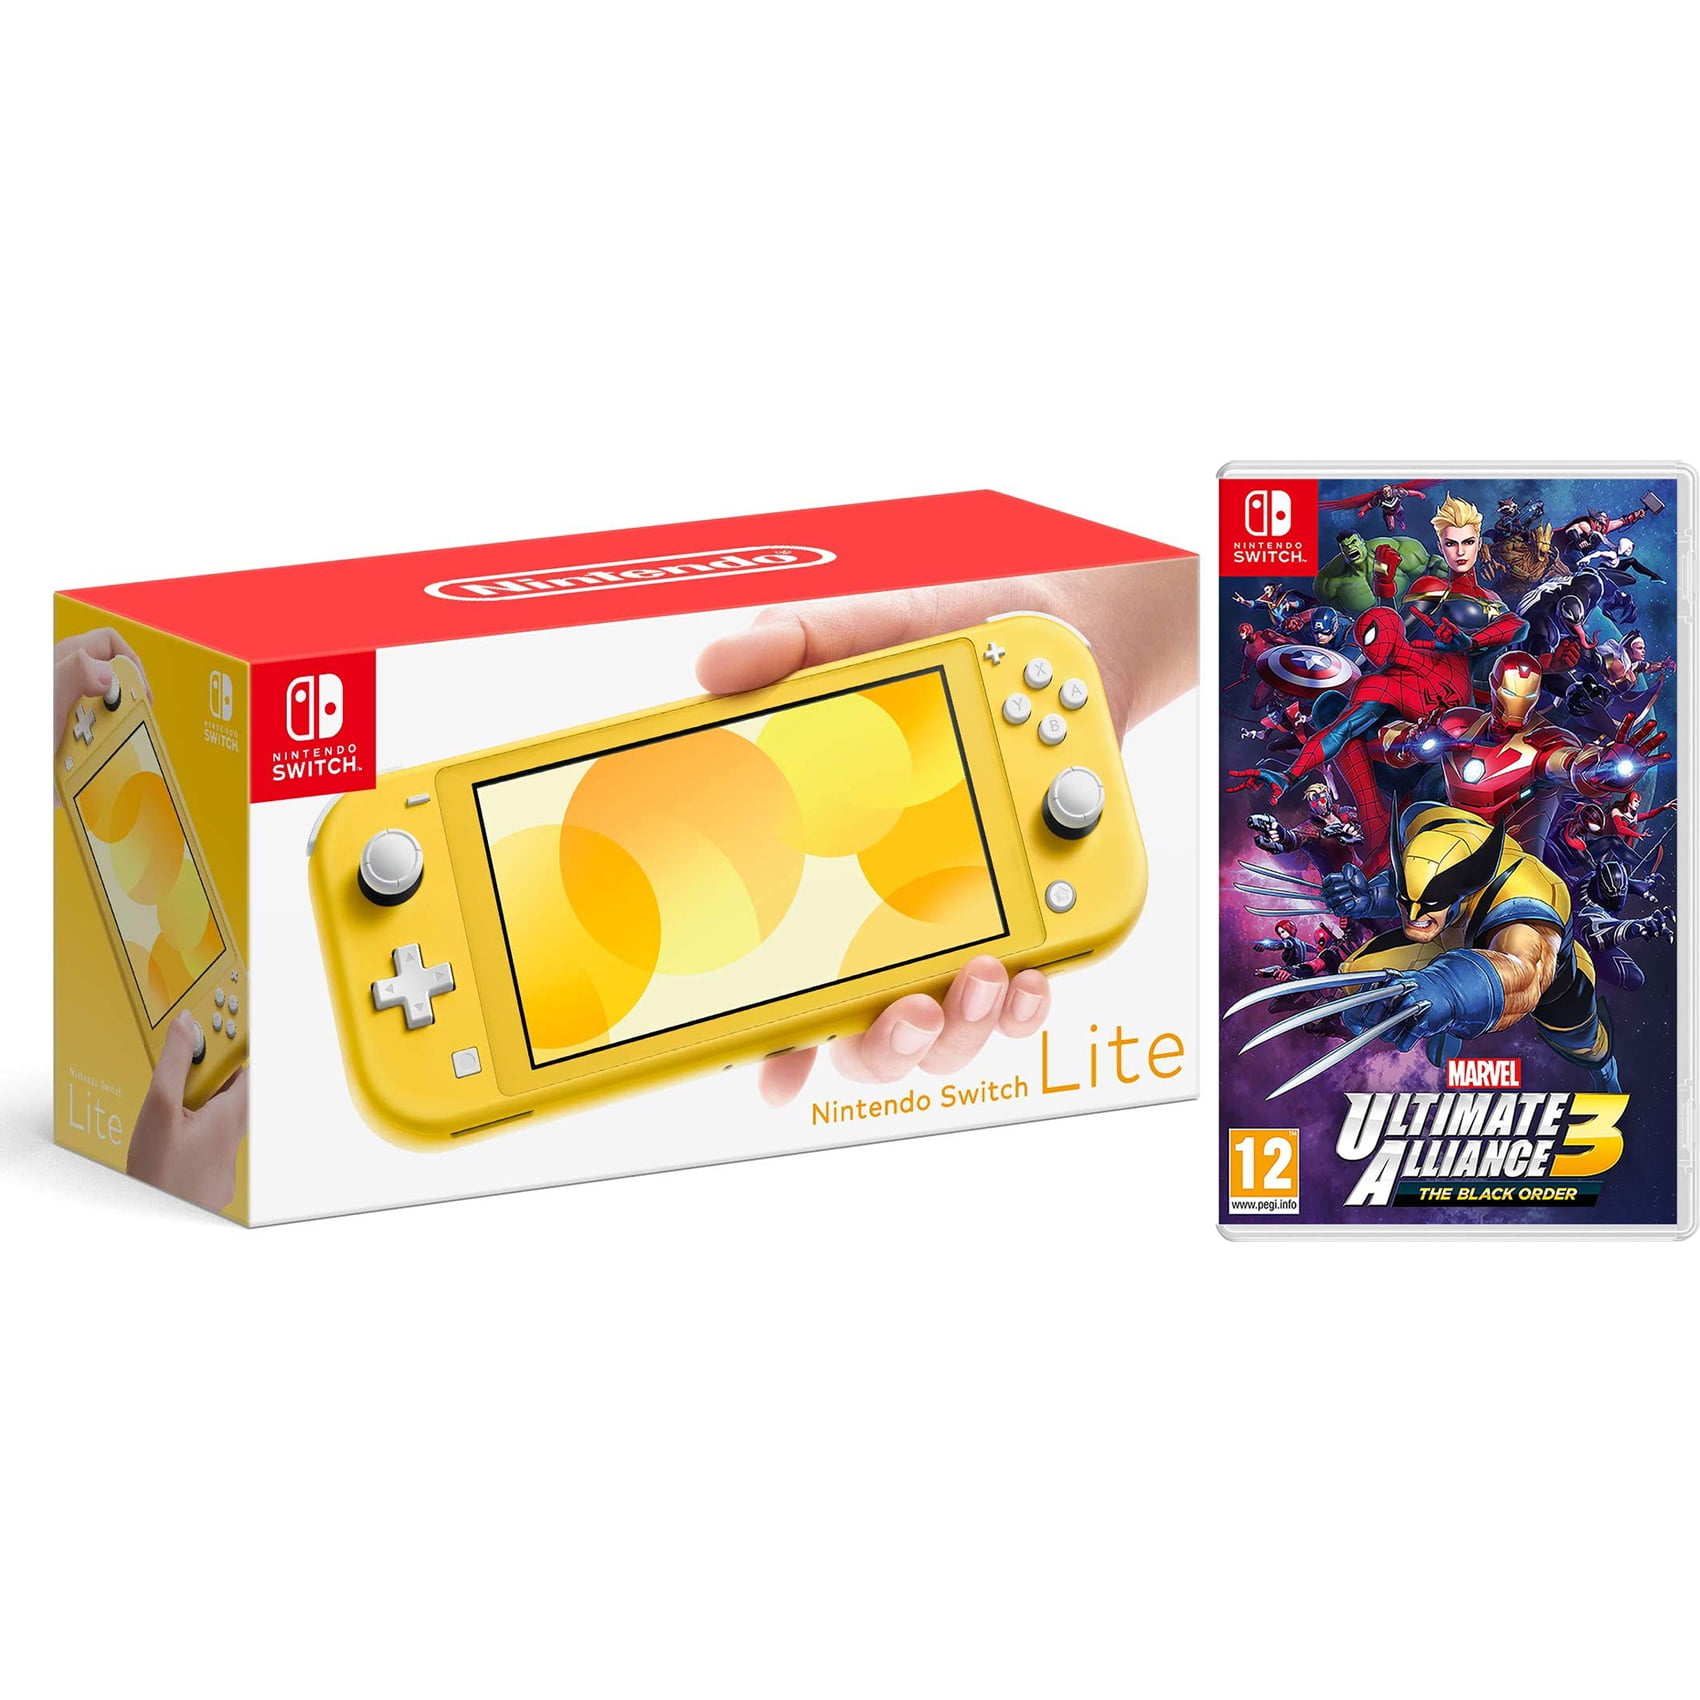 ultimate alliance 3 switch lite